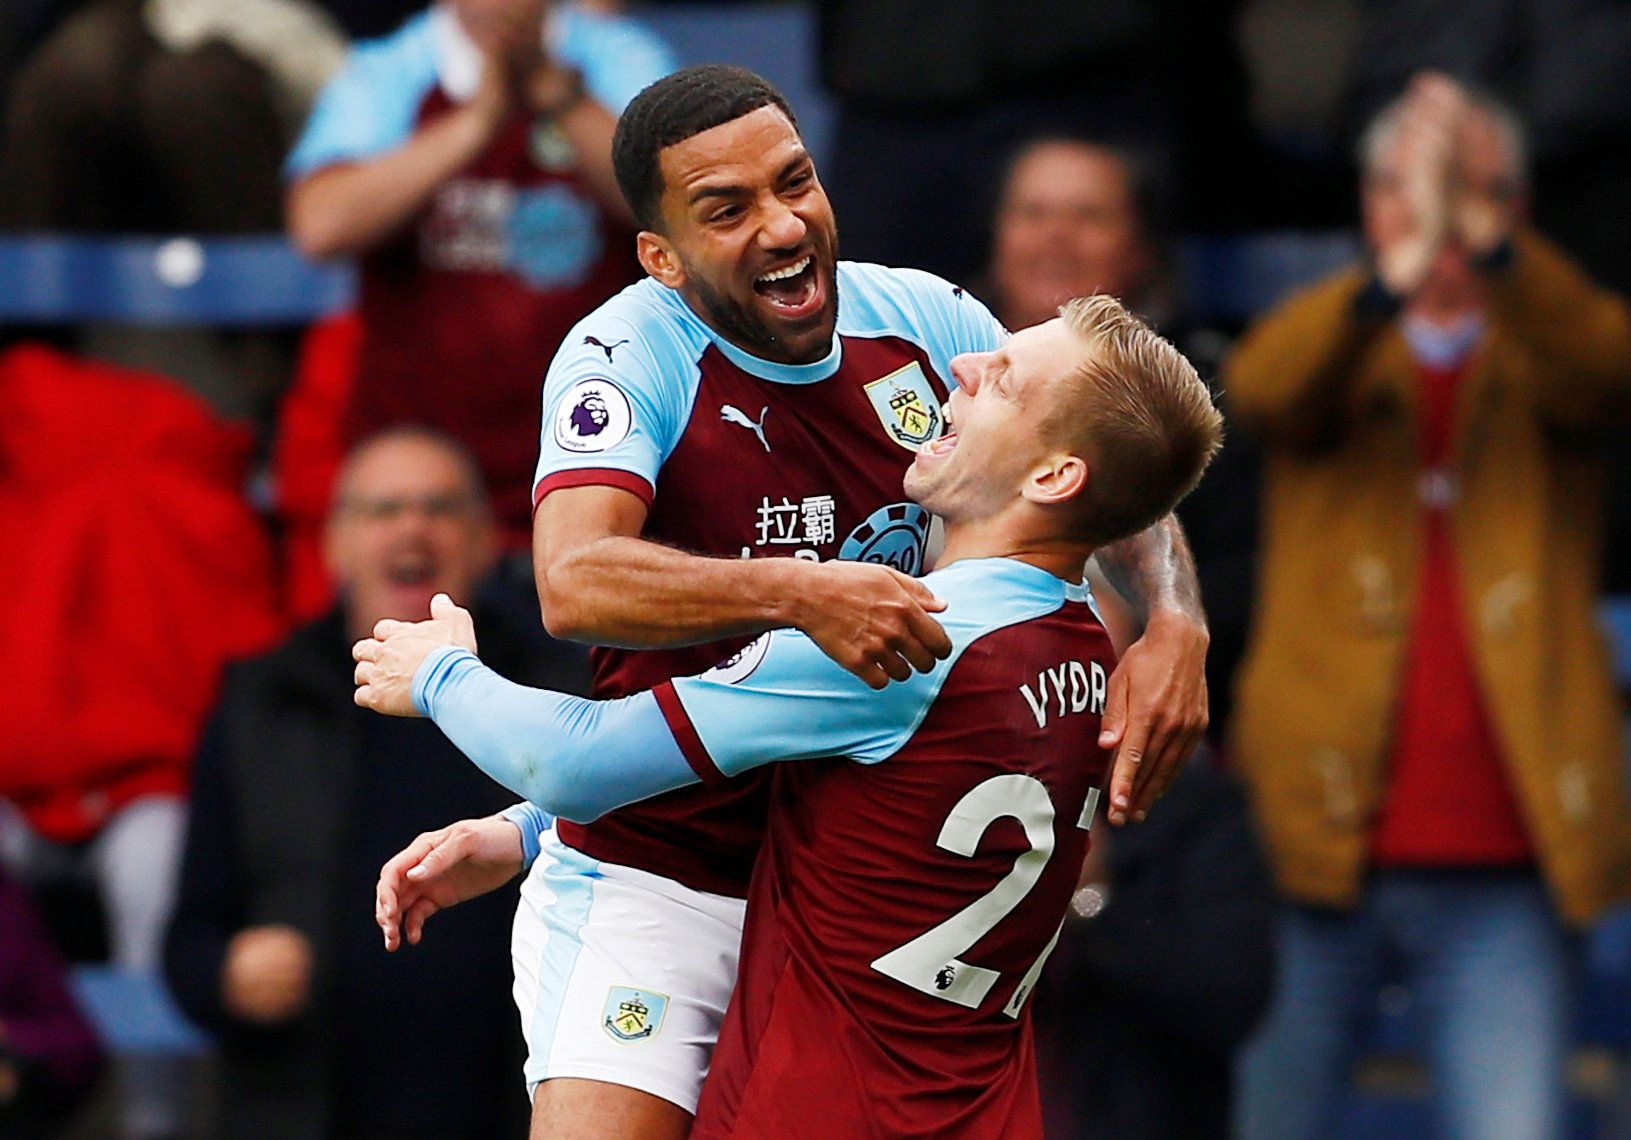 Soccer Football - Premier League - Burnley v AFC Bournemouth - Turf Moor, Burnley, Britain - September 22, 2018  Burnley's Matej Vydra celebrates scoring their first goal with Aaron Lennon            Action Images via Reuters/Jason Cairnduff  EDITORIAL USE ONLY. No use with unauthorized audio, video, data, fixture lists, club/league logos or "live" services. Online in-match use limited to 75 images, no video emulation. No use in betting, games or single club/league/player publications.  Please c